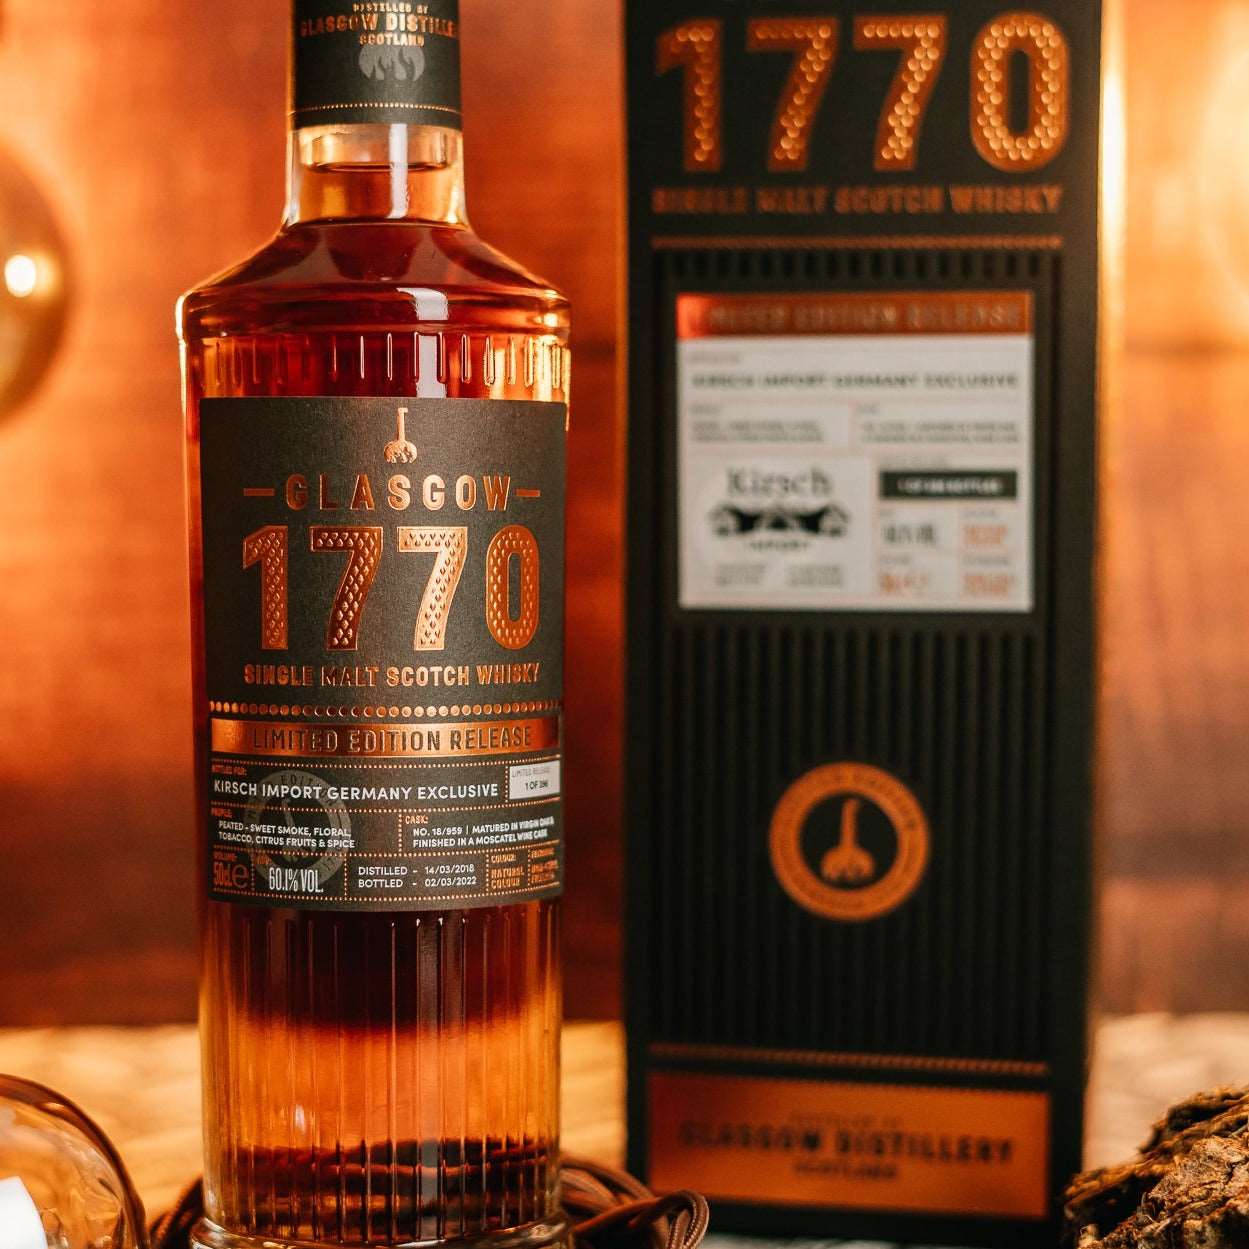 1770 Glasgow | 3 Jahre | 2018/2022 | Peated | Moscatel Finish| 0,5l | 60,1%GET A BOTTLE